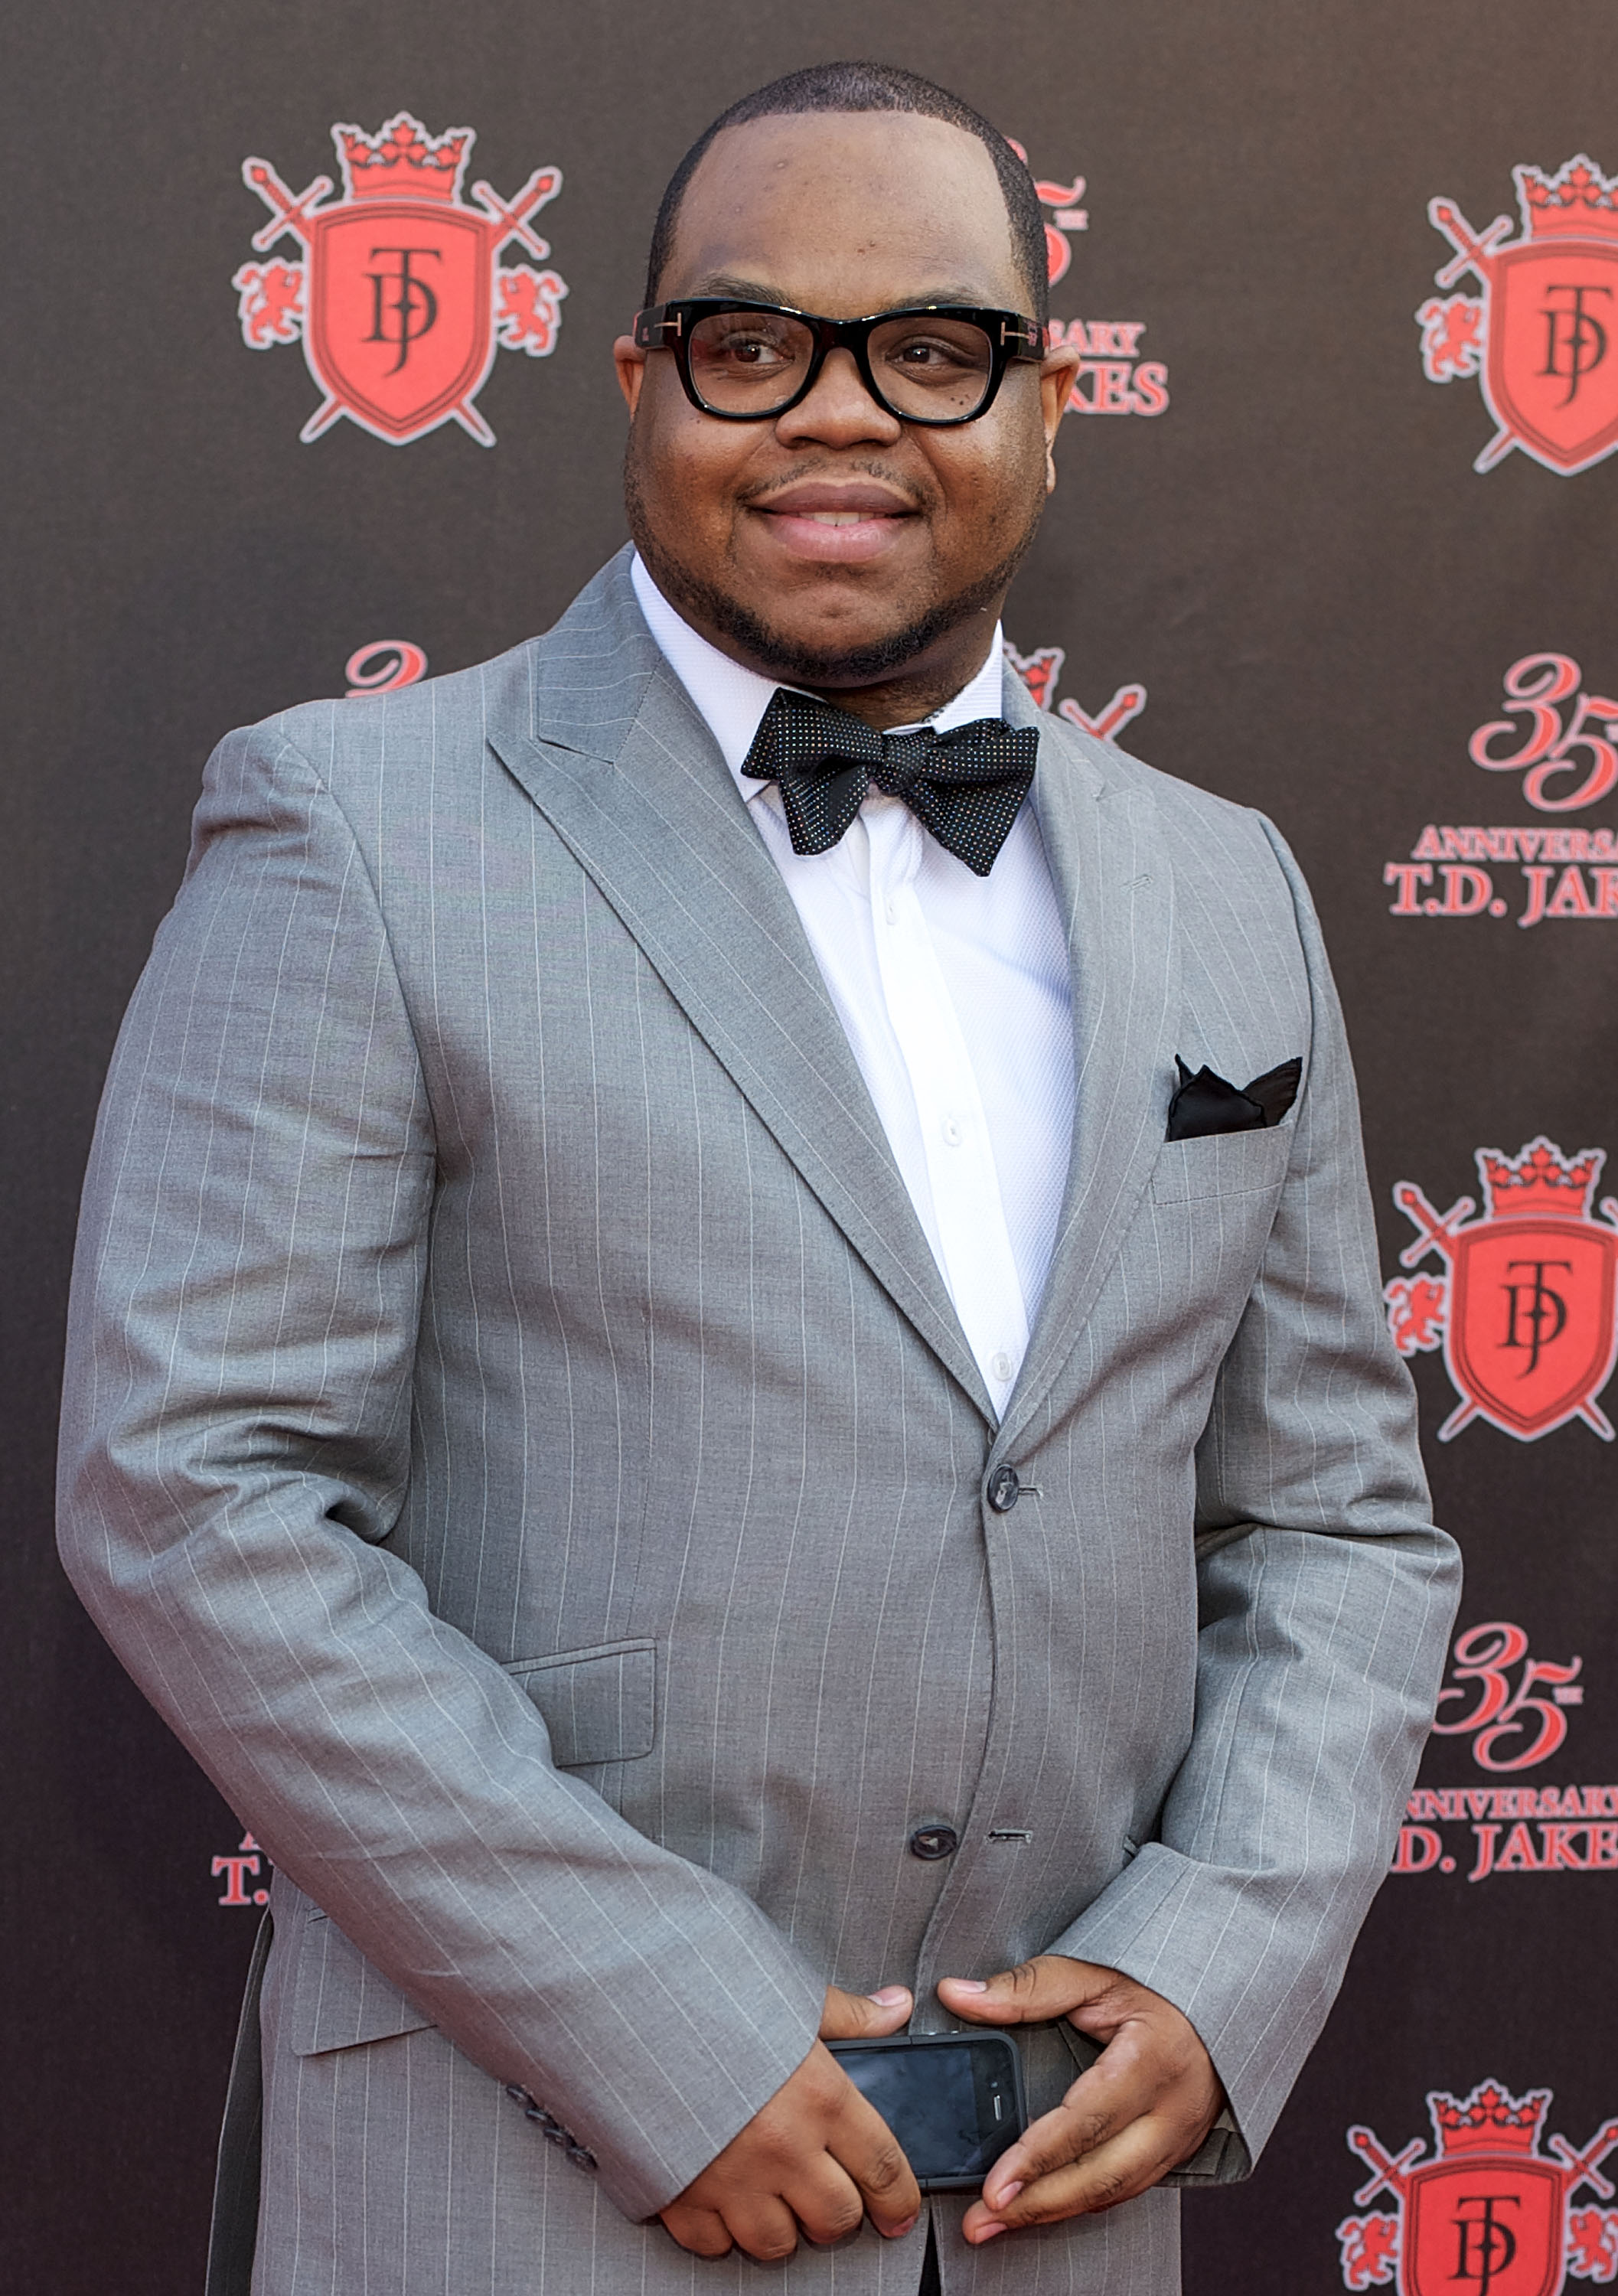 Jamar Jakes attends the 35th Anniversary Celebration for Bishop Thomas Dexter "T.D." Jakes at the AT&T Performing Arts Center on June 8, 2012, in Dallas, Texas. | Source: Getty Images